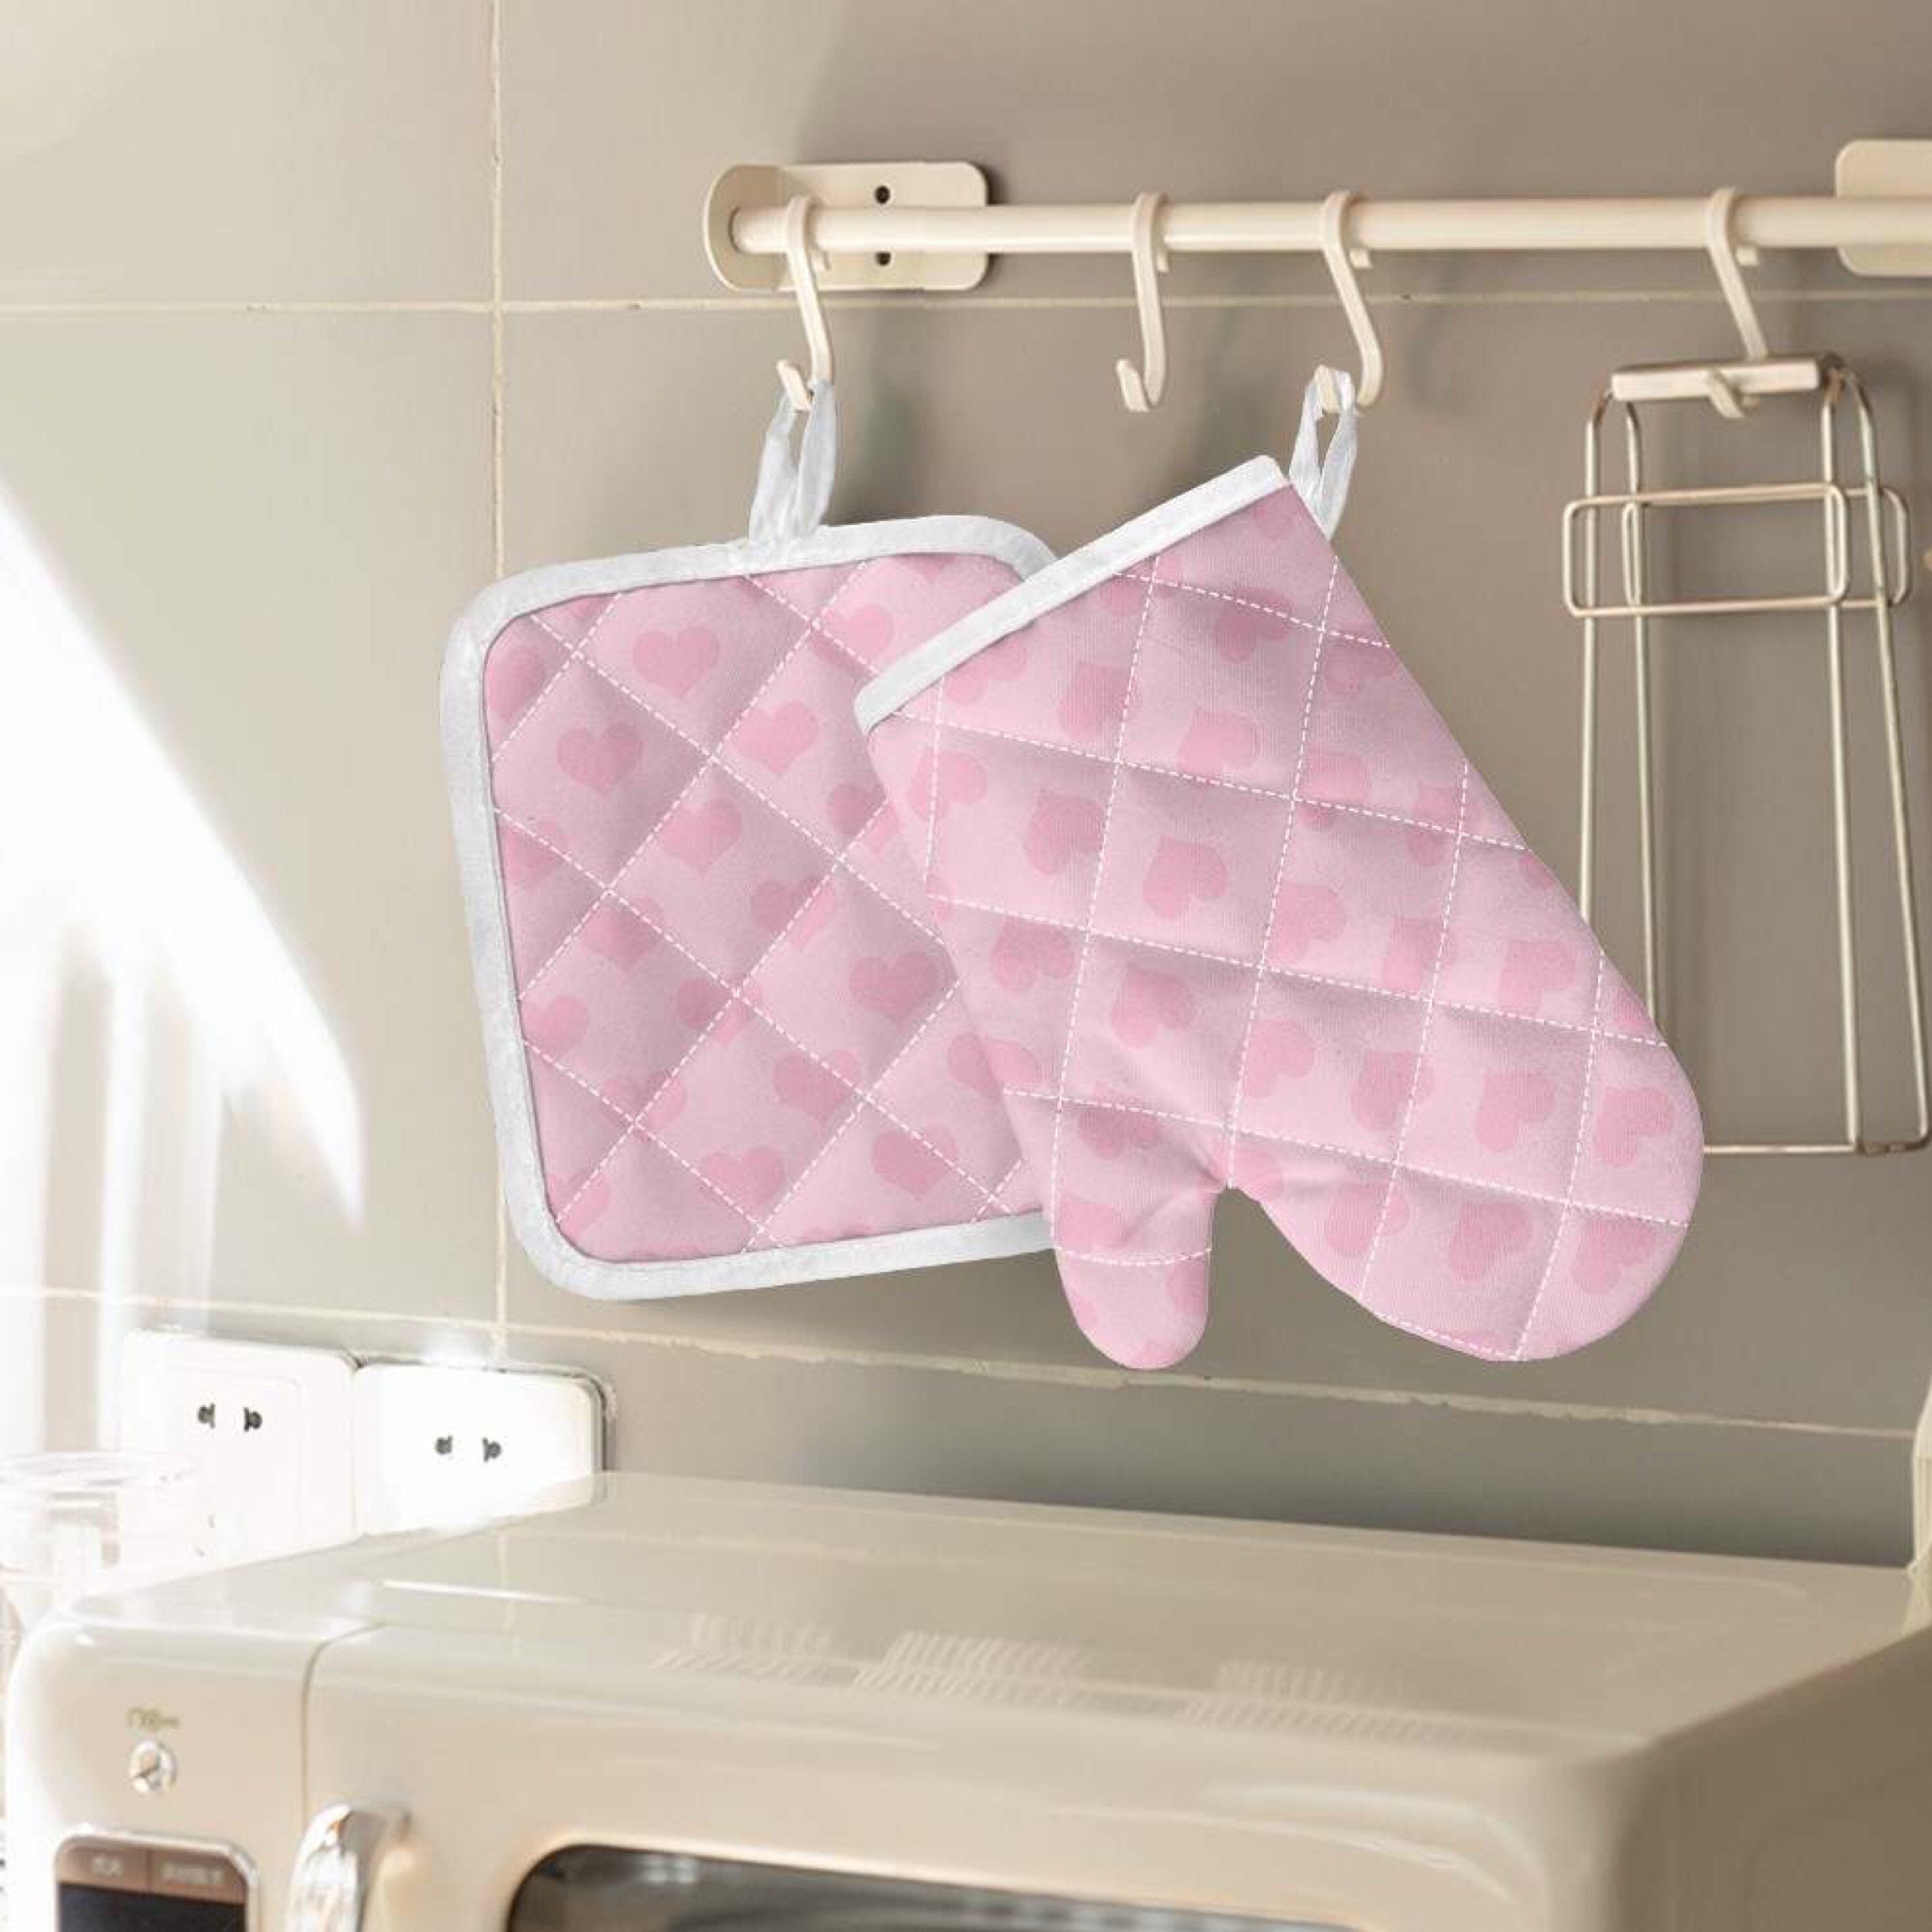 Cute Oven Mitts  Streit's Matzah Cute Oven Mitts And Kitchen Towel Set